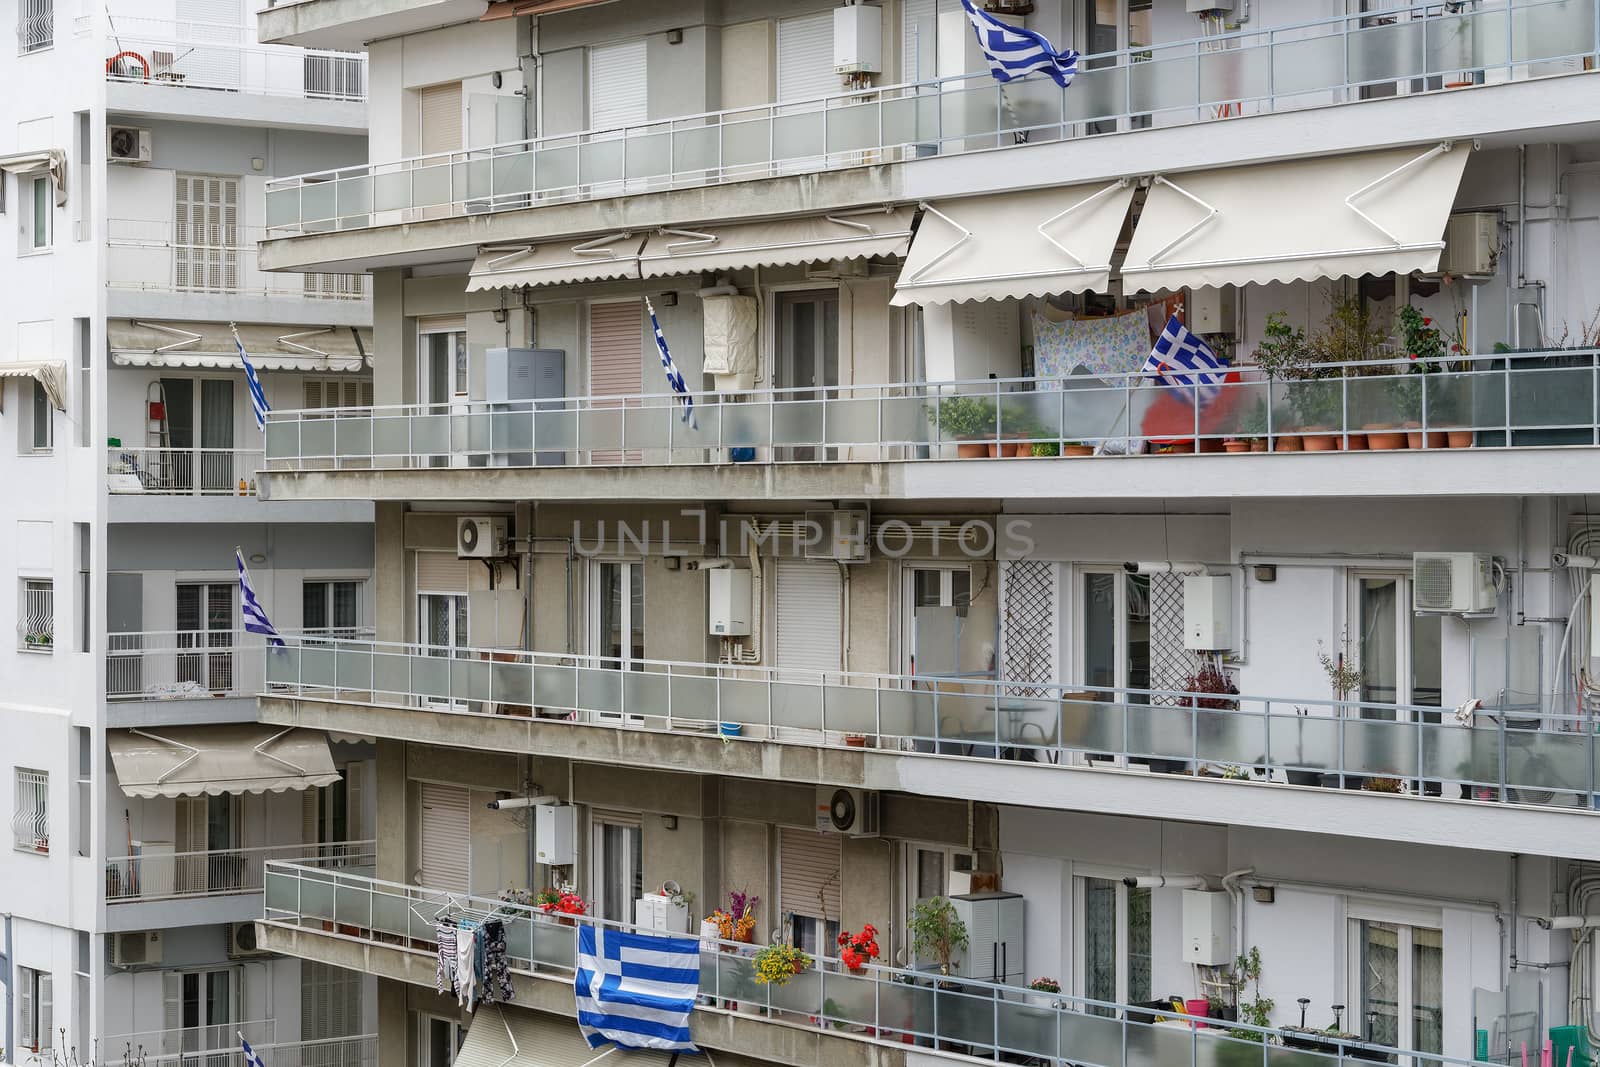 Greek flags waving on balconies for a national celebration. by bestravelvideo